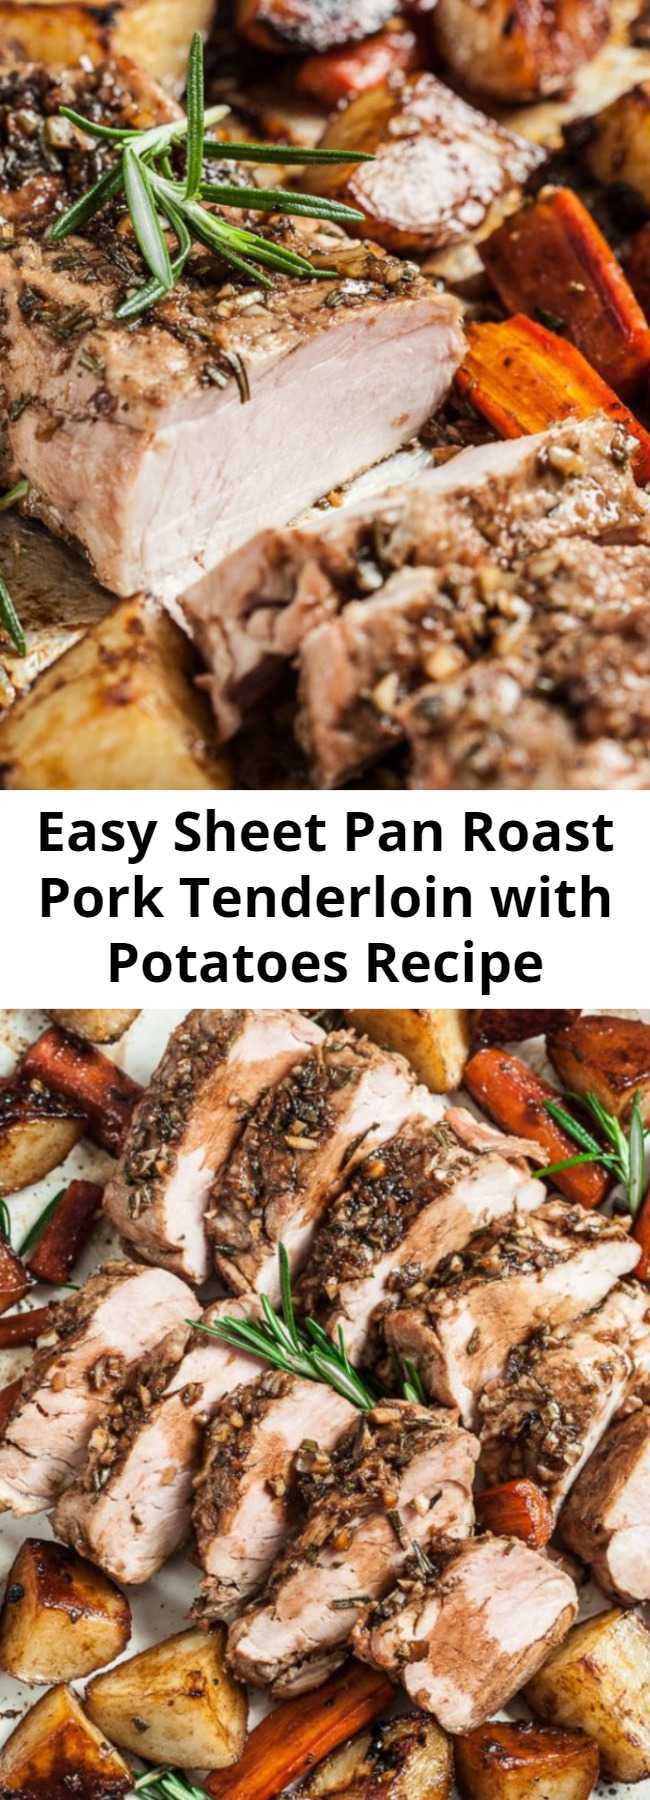 Easy Sheet Pan Roast Pork Tenderloin with Potatoes Recipe - This Sheet Pan Roast Pork Tenderloin with Potatoes is extremely tender, succulent, and healthy. This pork tenderloin recipe is easy enough for a weeknight meal and delicious enough for serving to guests. Little effort with big results.